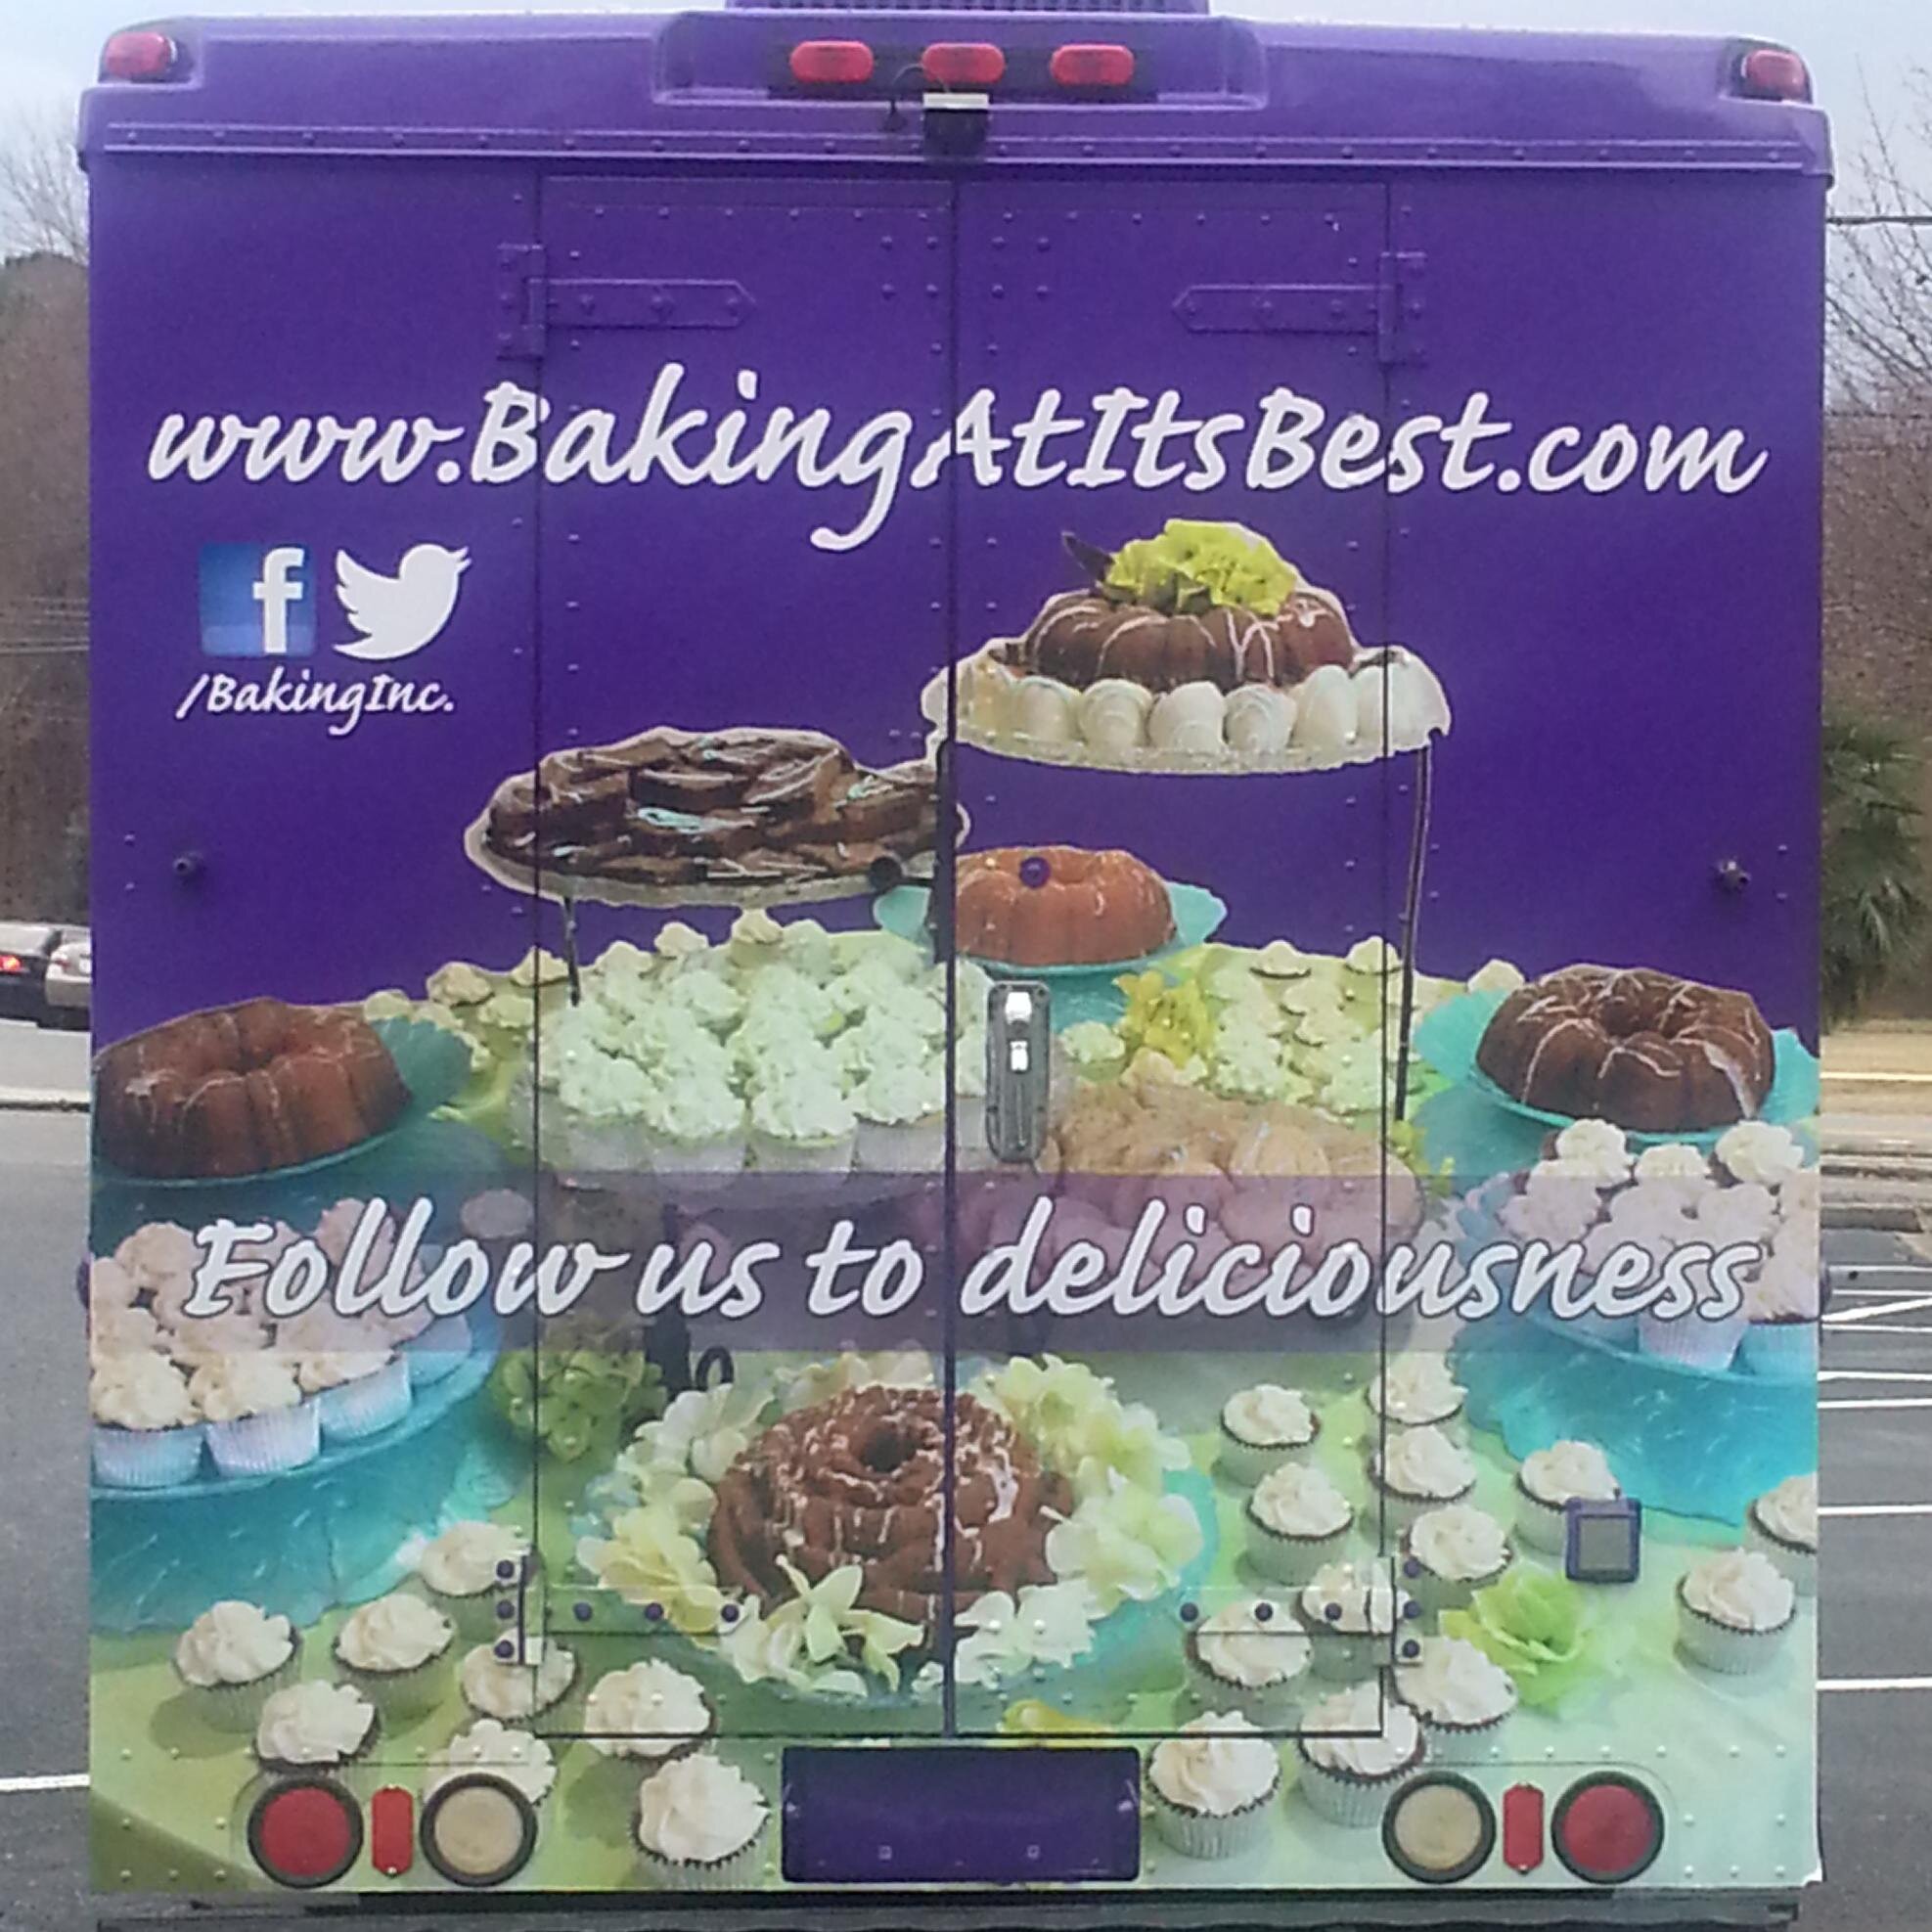 Charlotte's 1st Mobile Bakery! The Art of Baking, Inc. was established in order to bring you “Baking At Its Best.” | Desserts | Custom cakes and More!